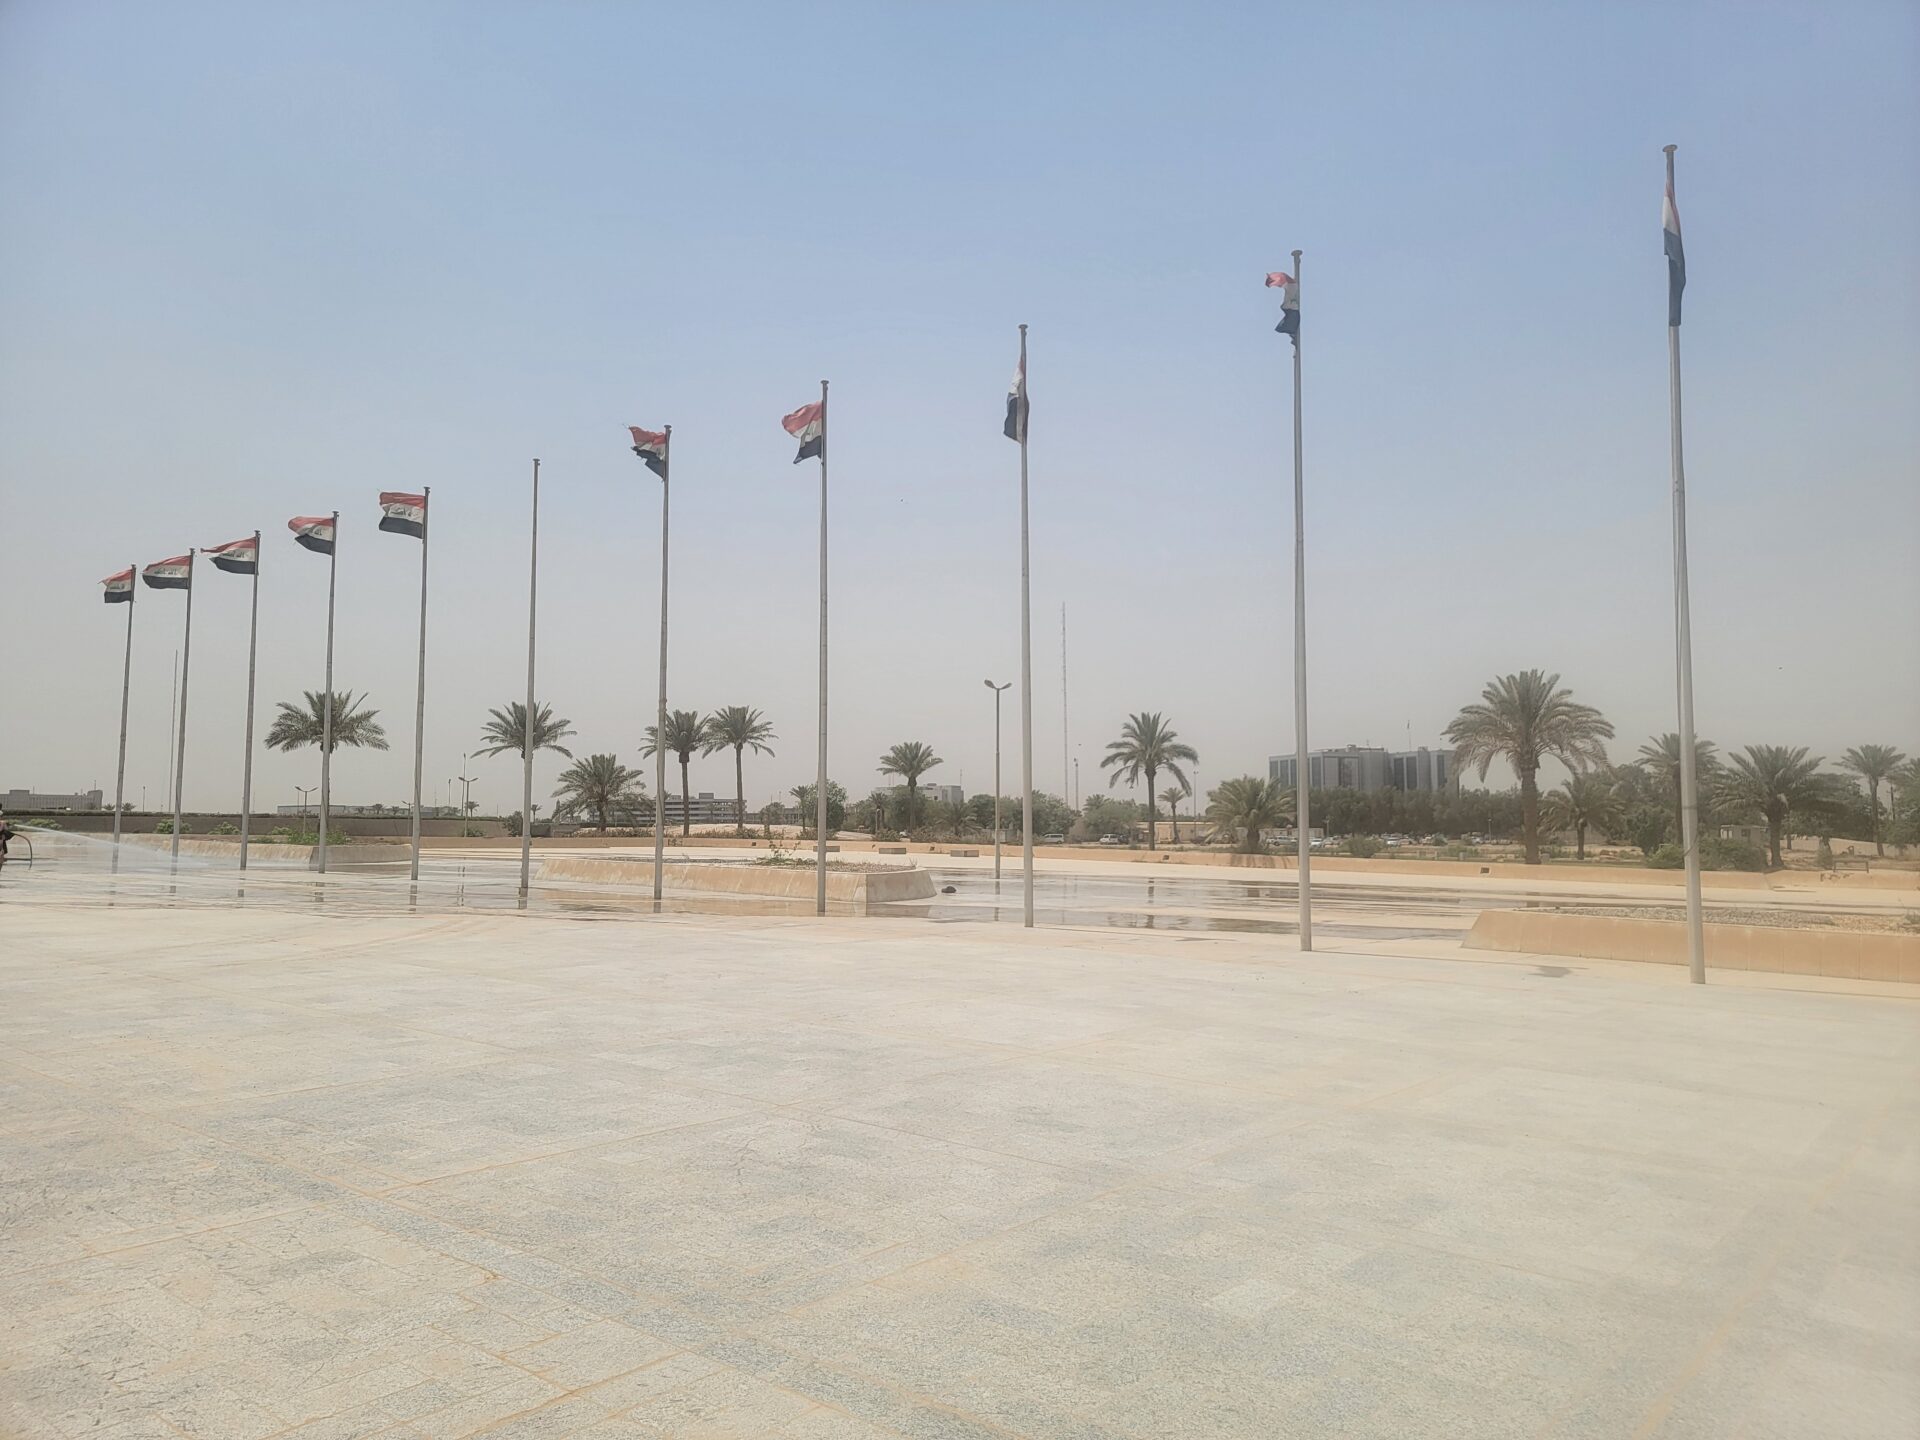 a group of flags on poles